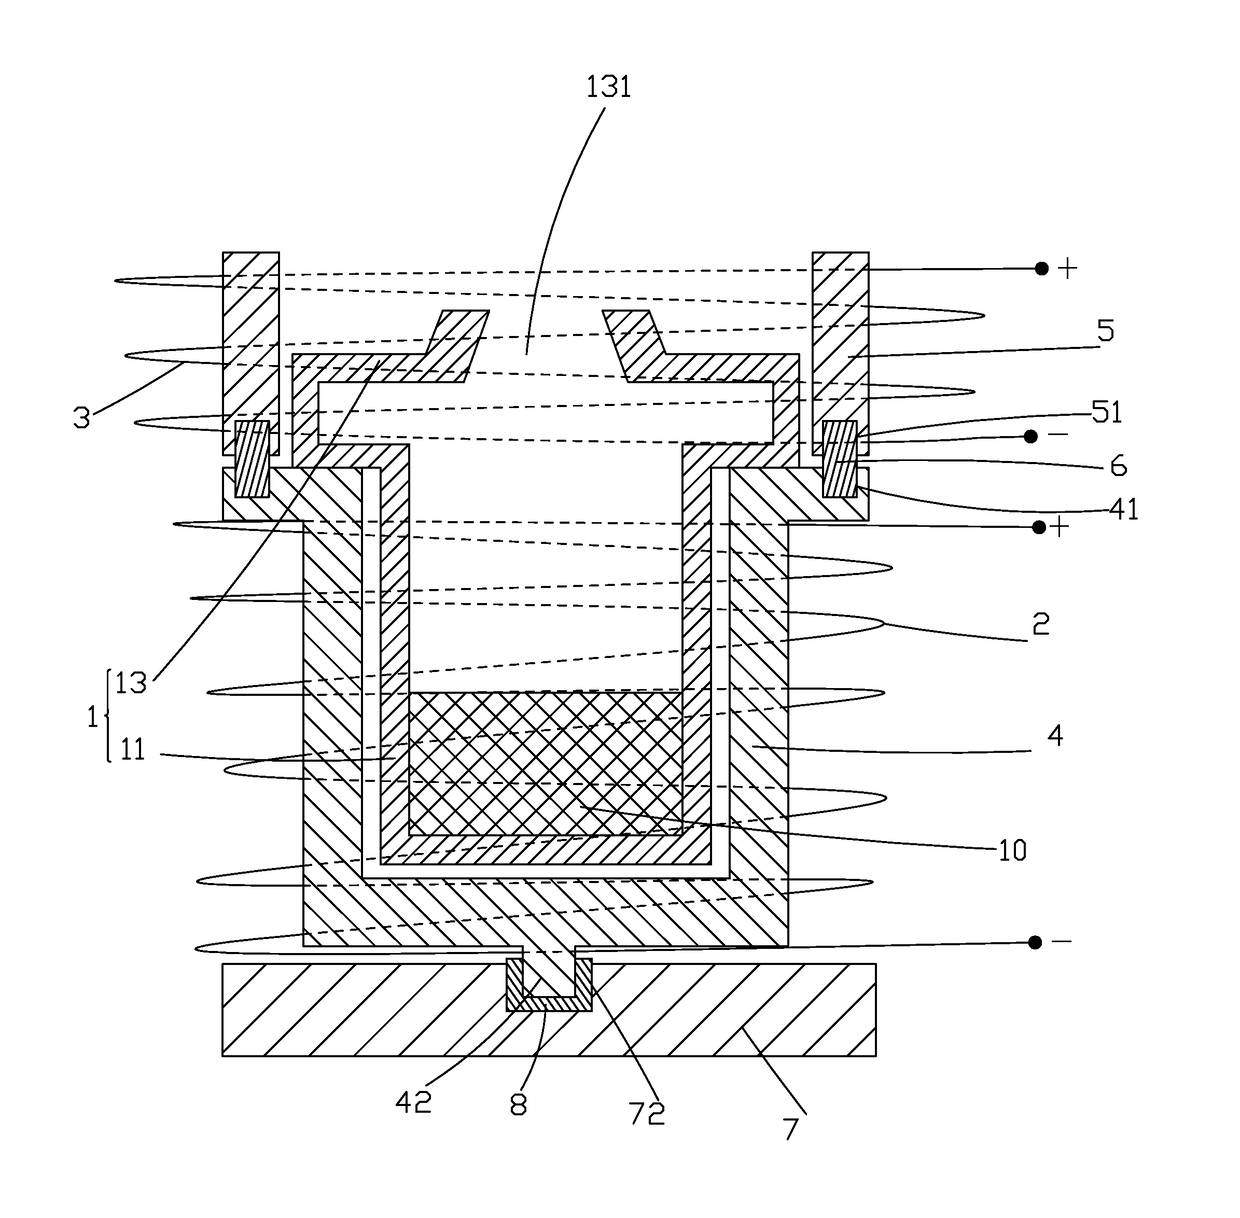 Heating device for evaporation of OLED material